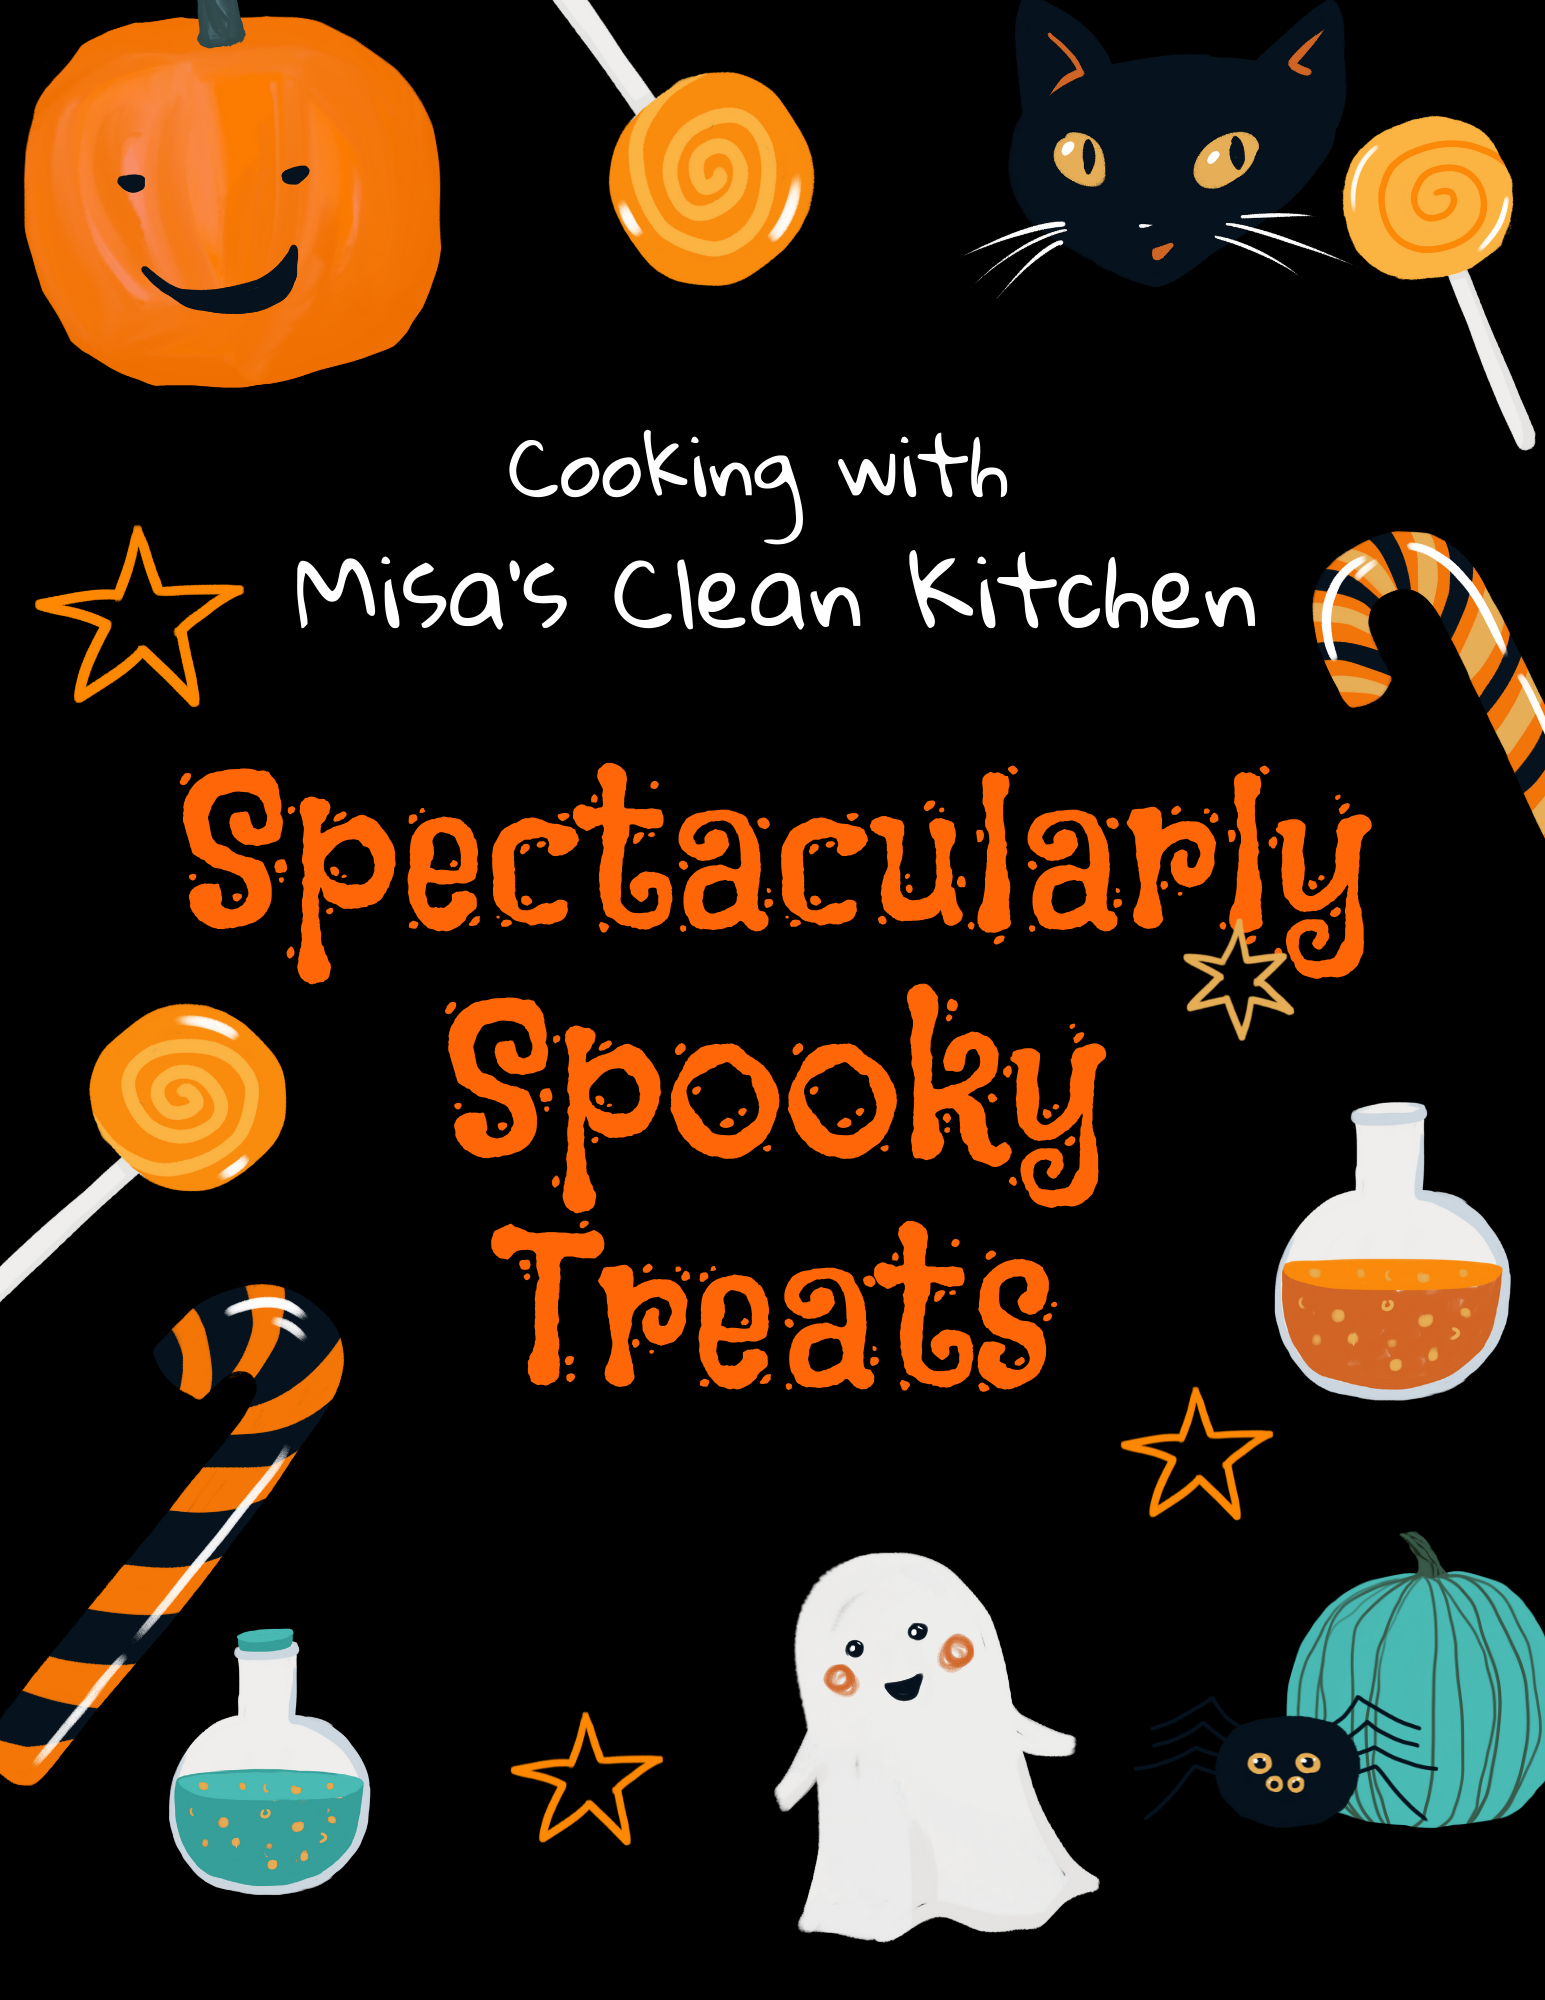 Spectacularly Spooky Treats with Misa's Clean Kitchen